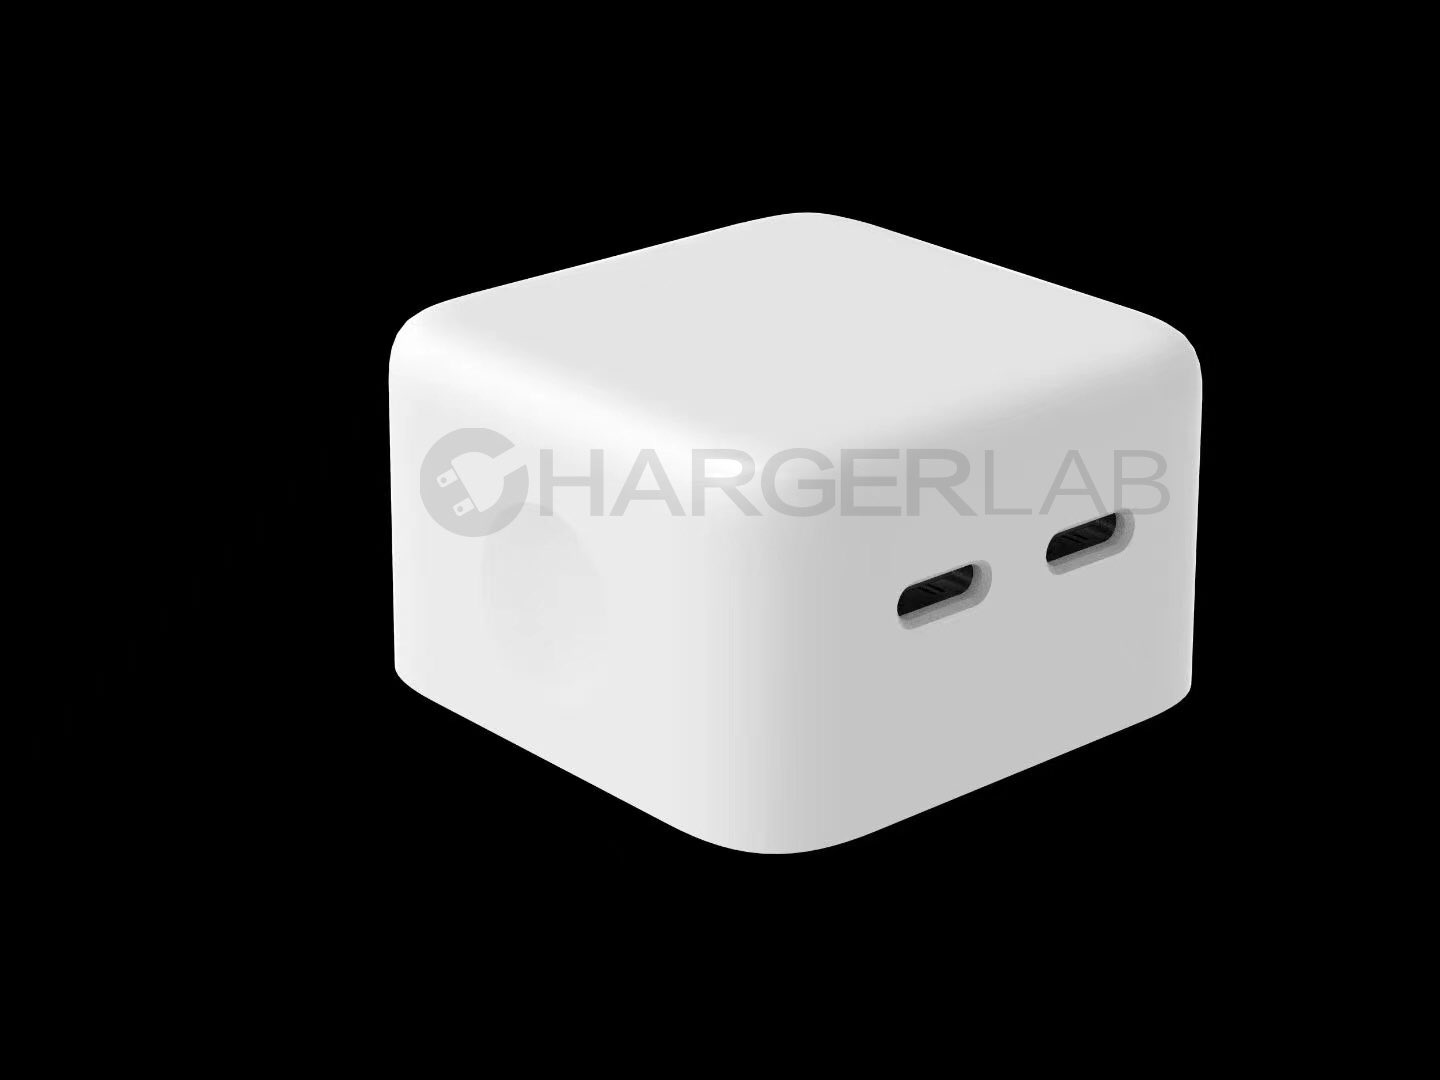 A fan-made render of the rumoured Apple 35W dual power adapter